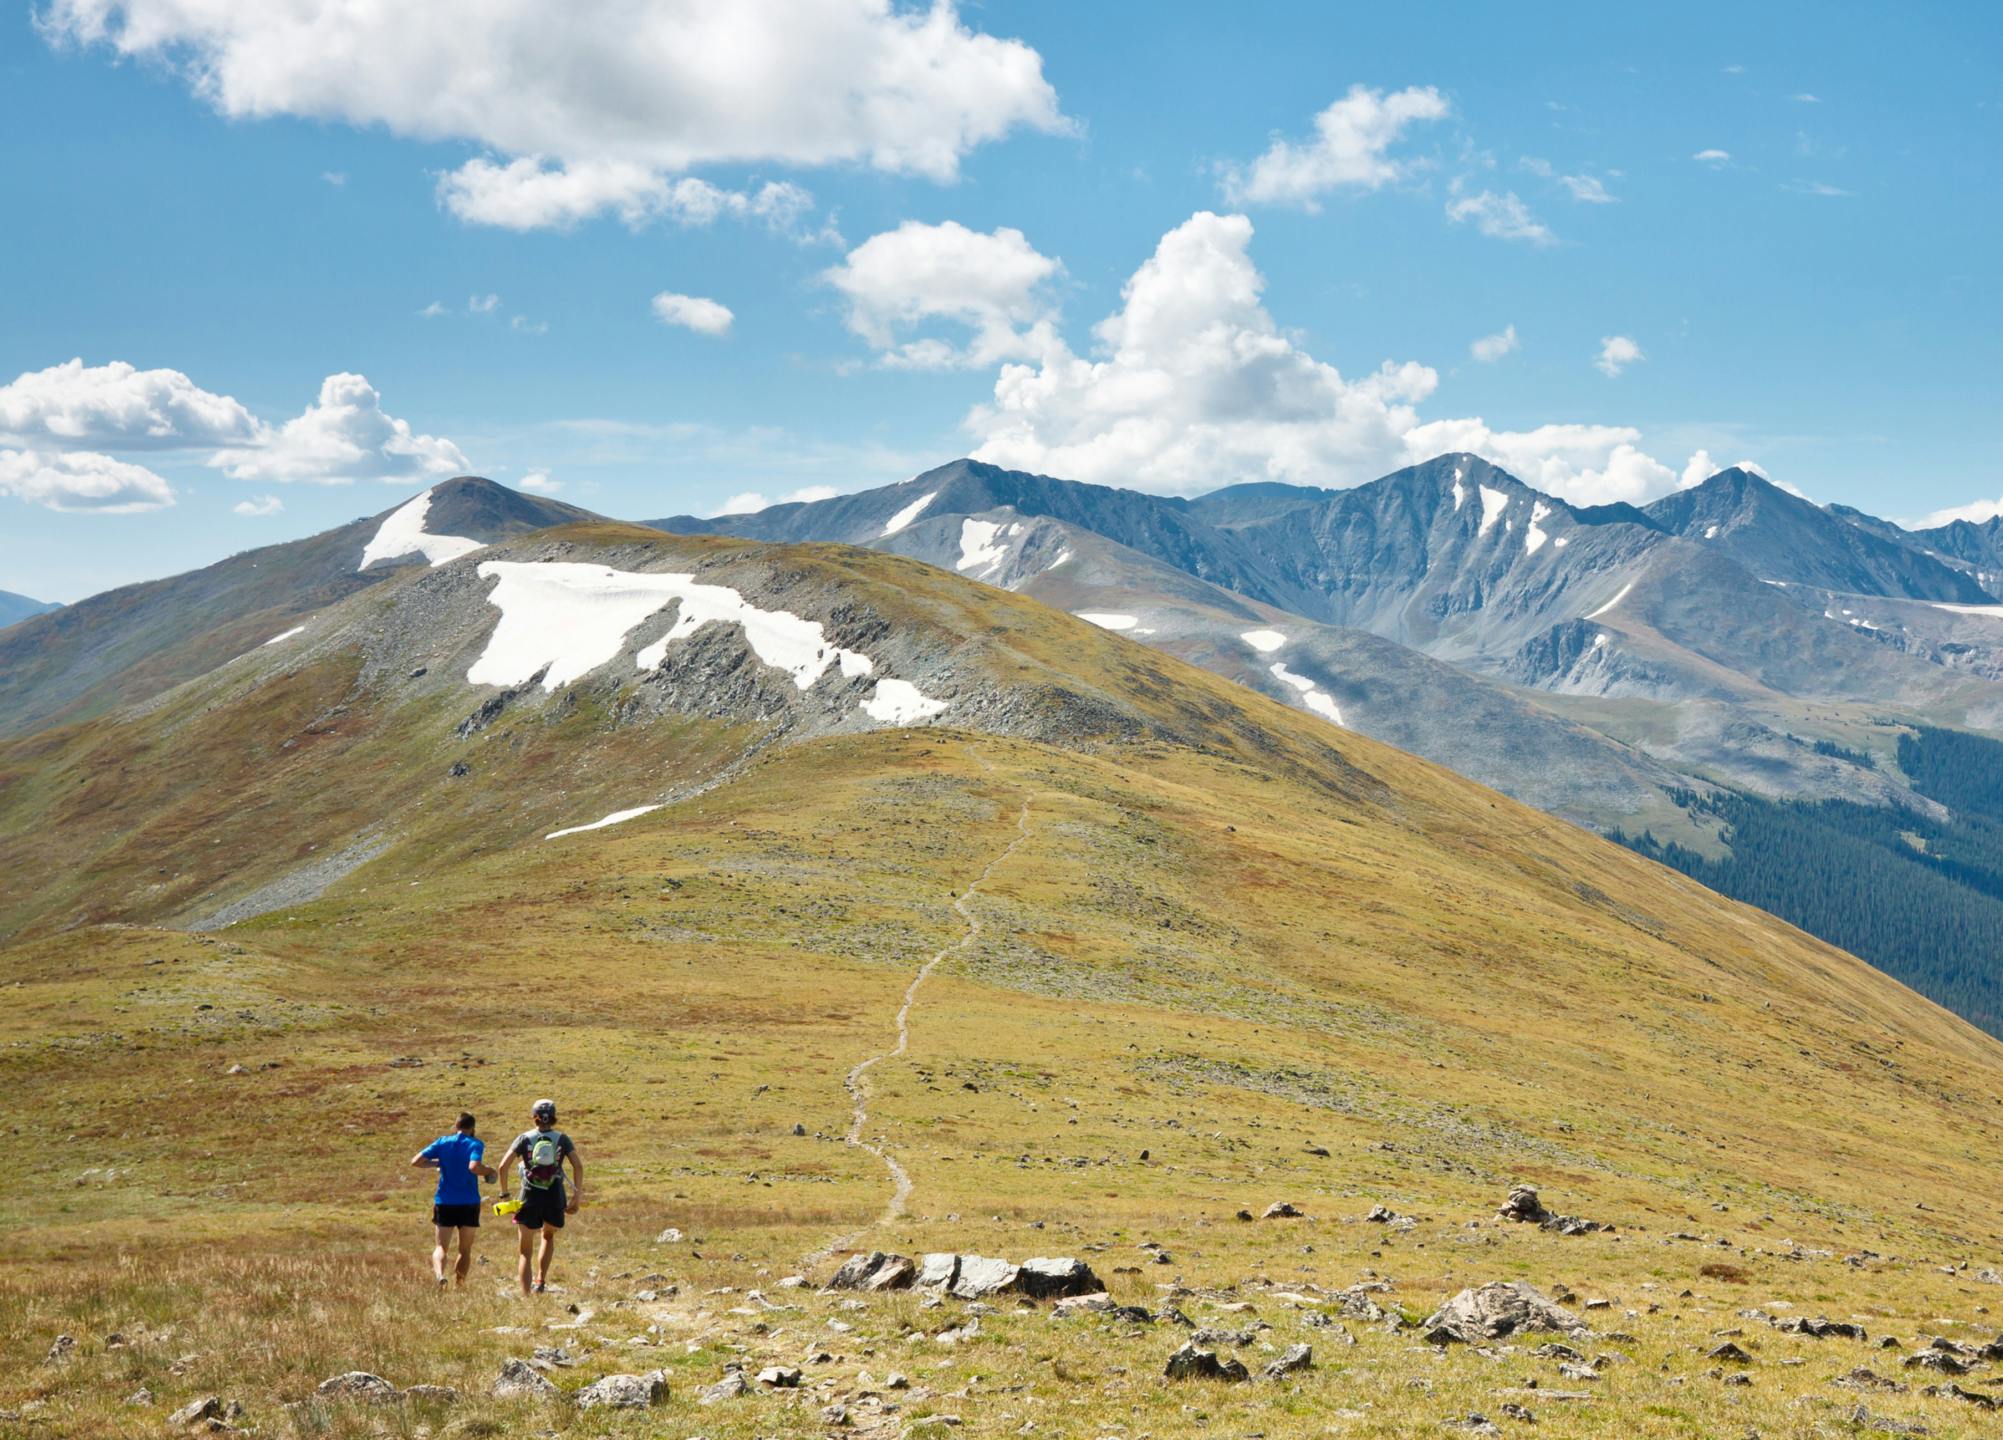 A scenic mountain view of the Rocky Mountains National Park with two hikers walking on a trail along the mountain ridge